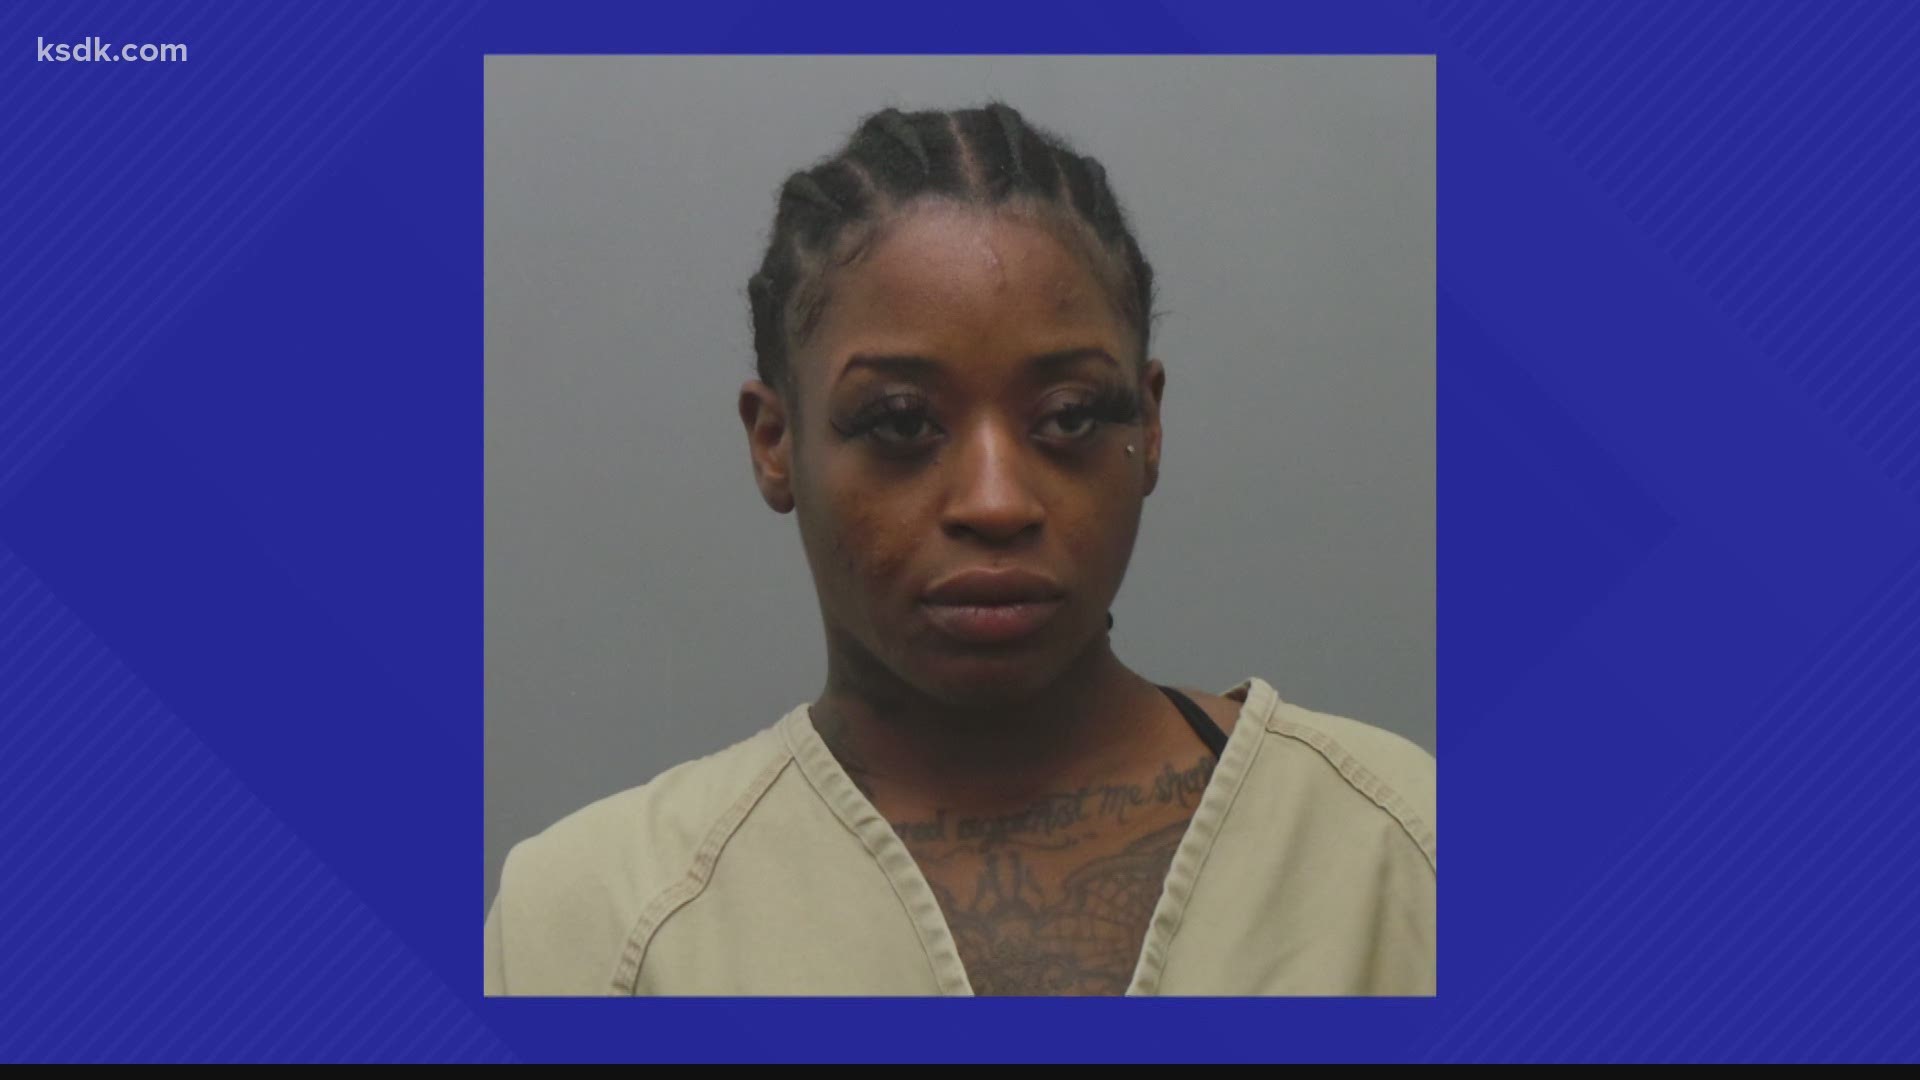 Woman, 29, turns herself in, charged with killing boyfriend ksdk